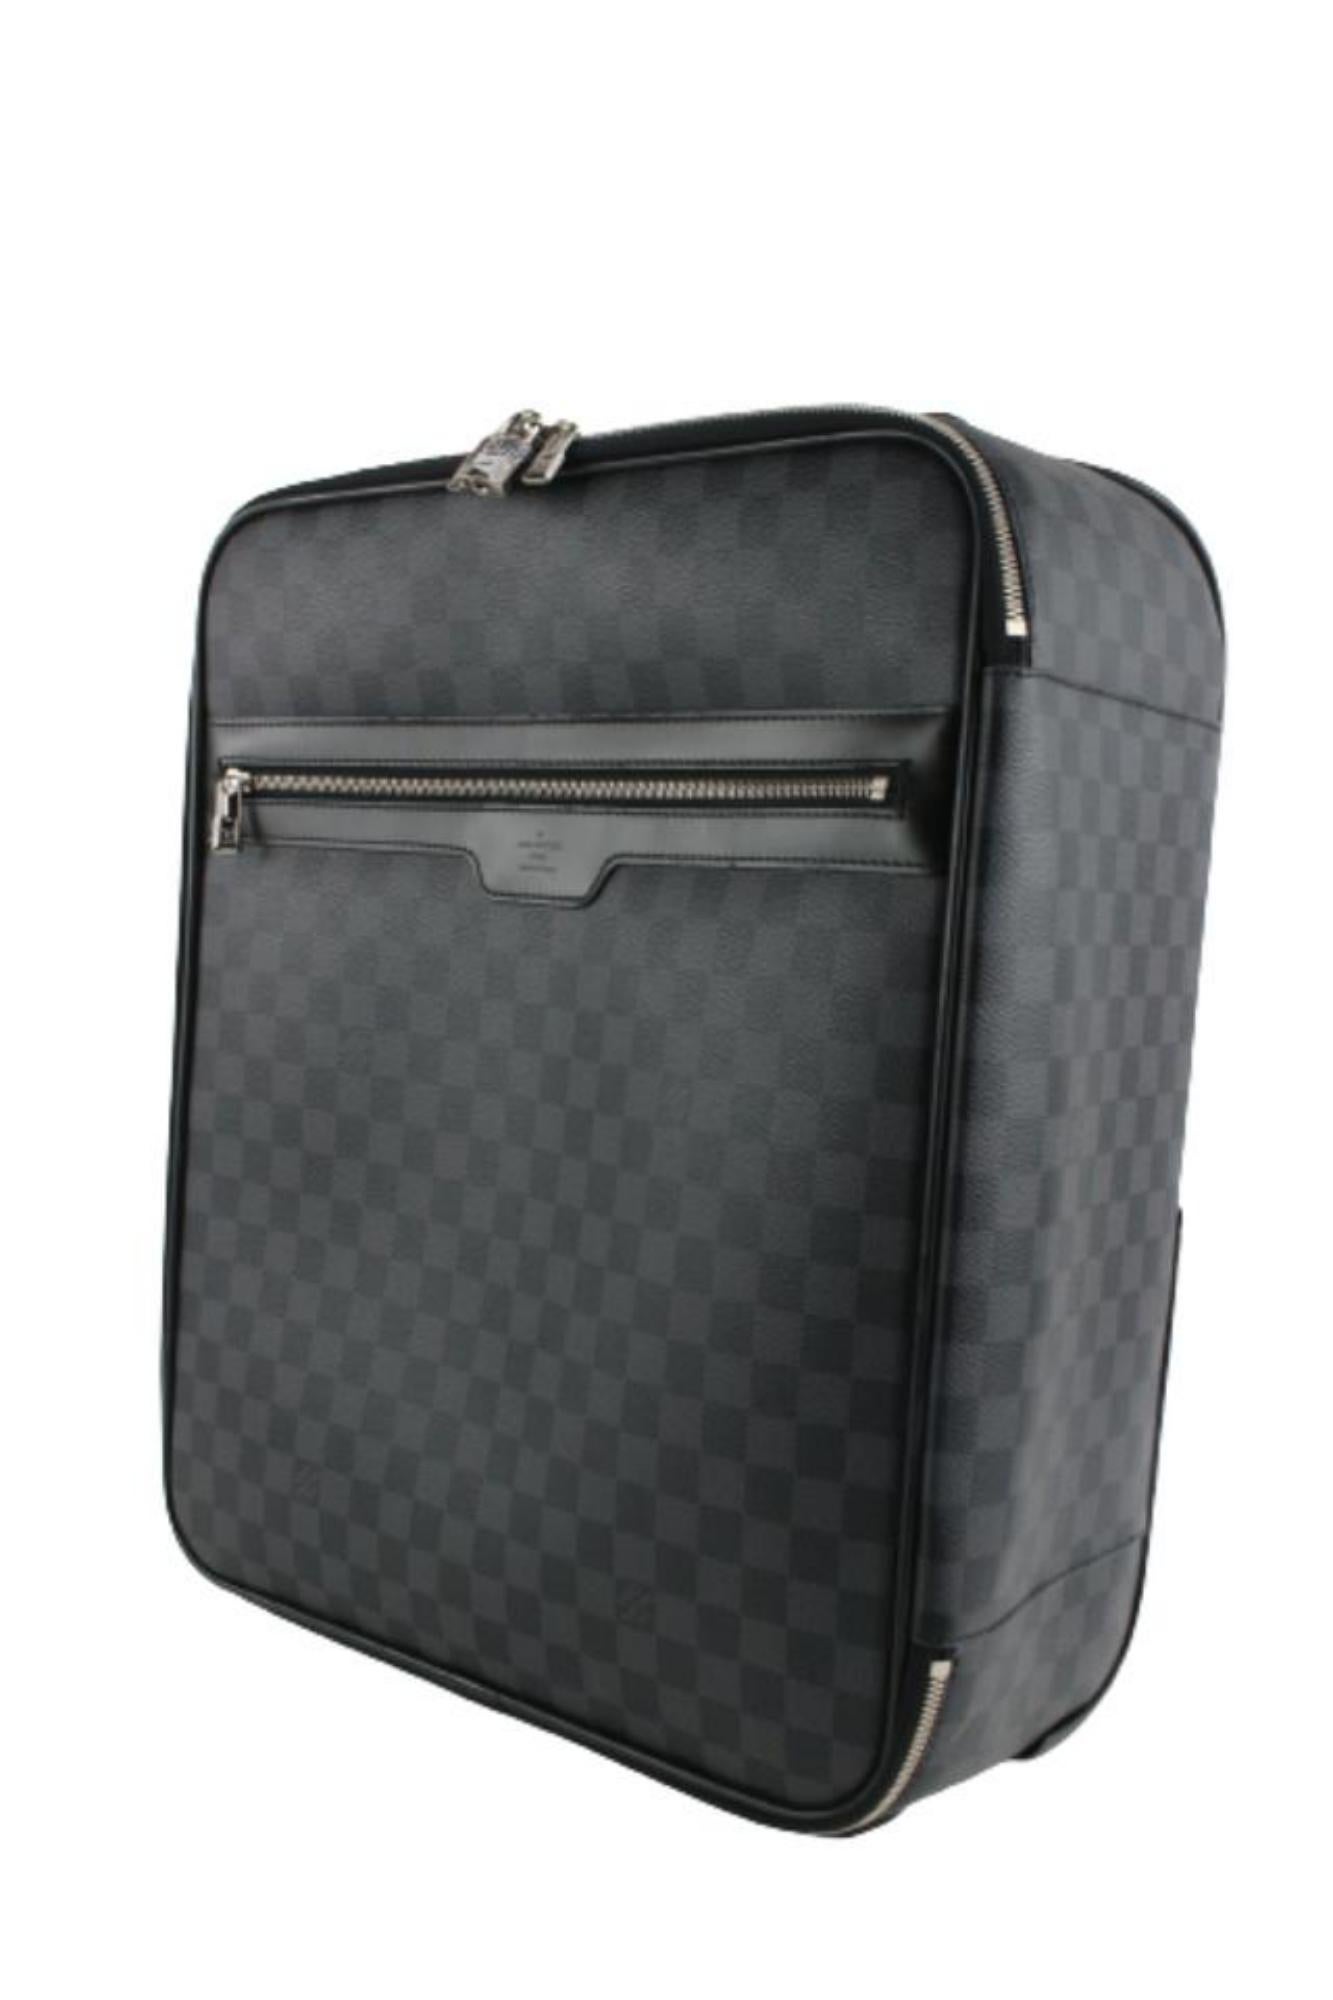 Louis Vuitton Damier Graphite Pegase 45 Rolling Luggage Trolley Suitcase 1223lv2
Date Code/Serial Number: SP0190
Made In: France
Measurements: Length:  14.5